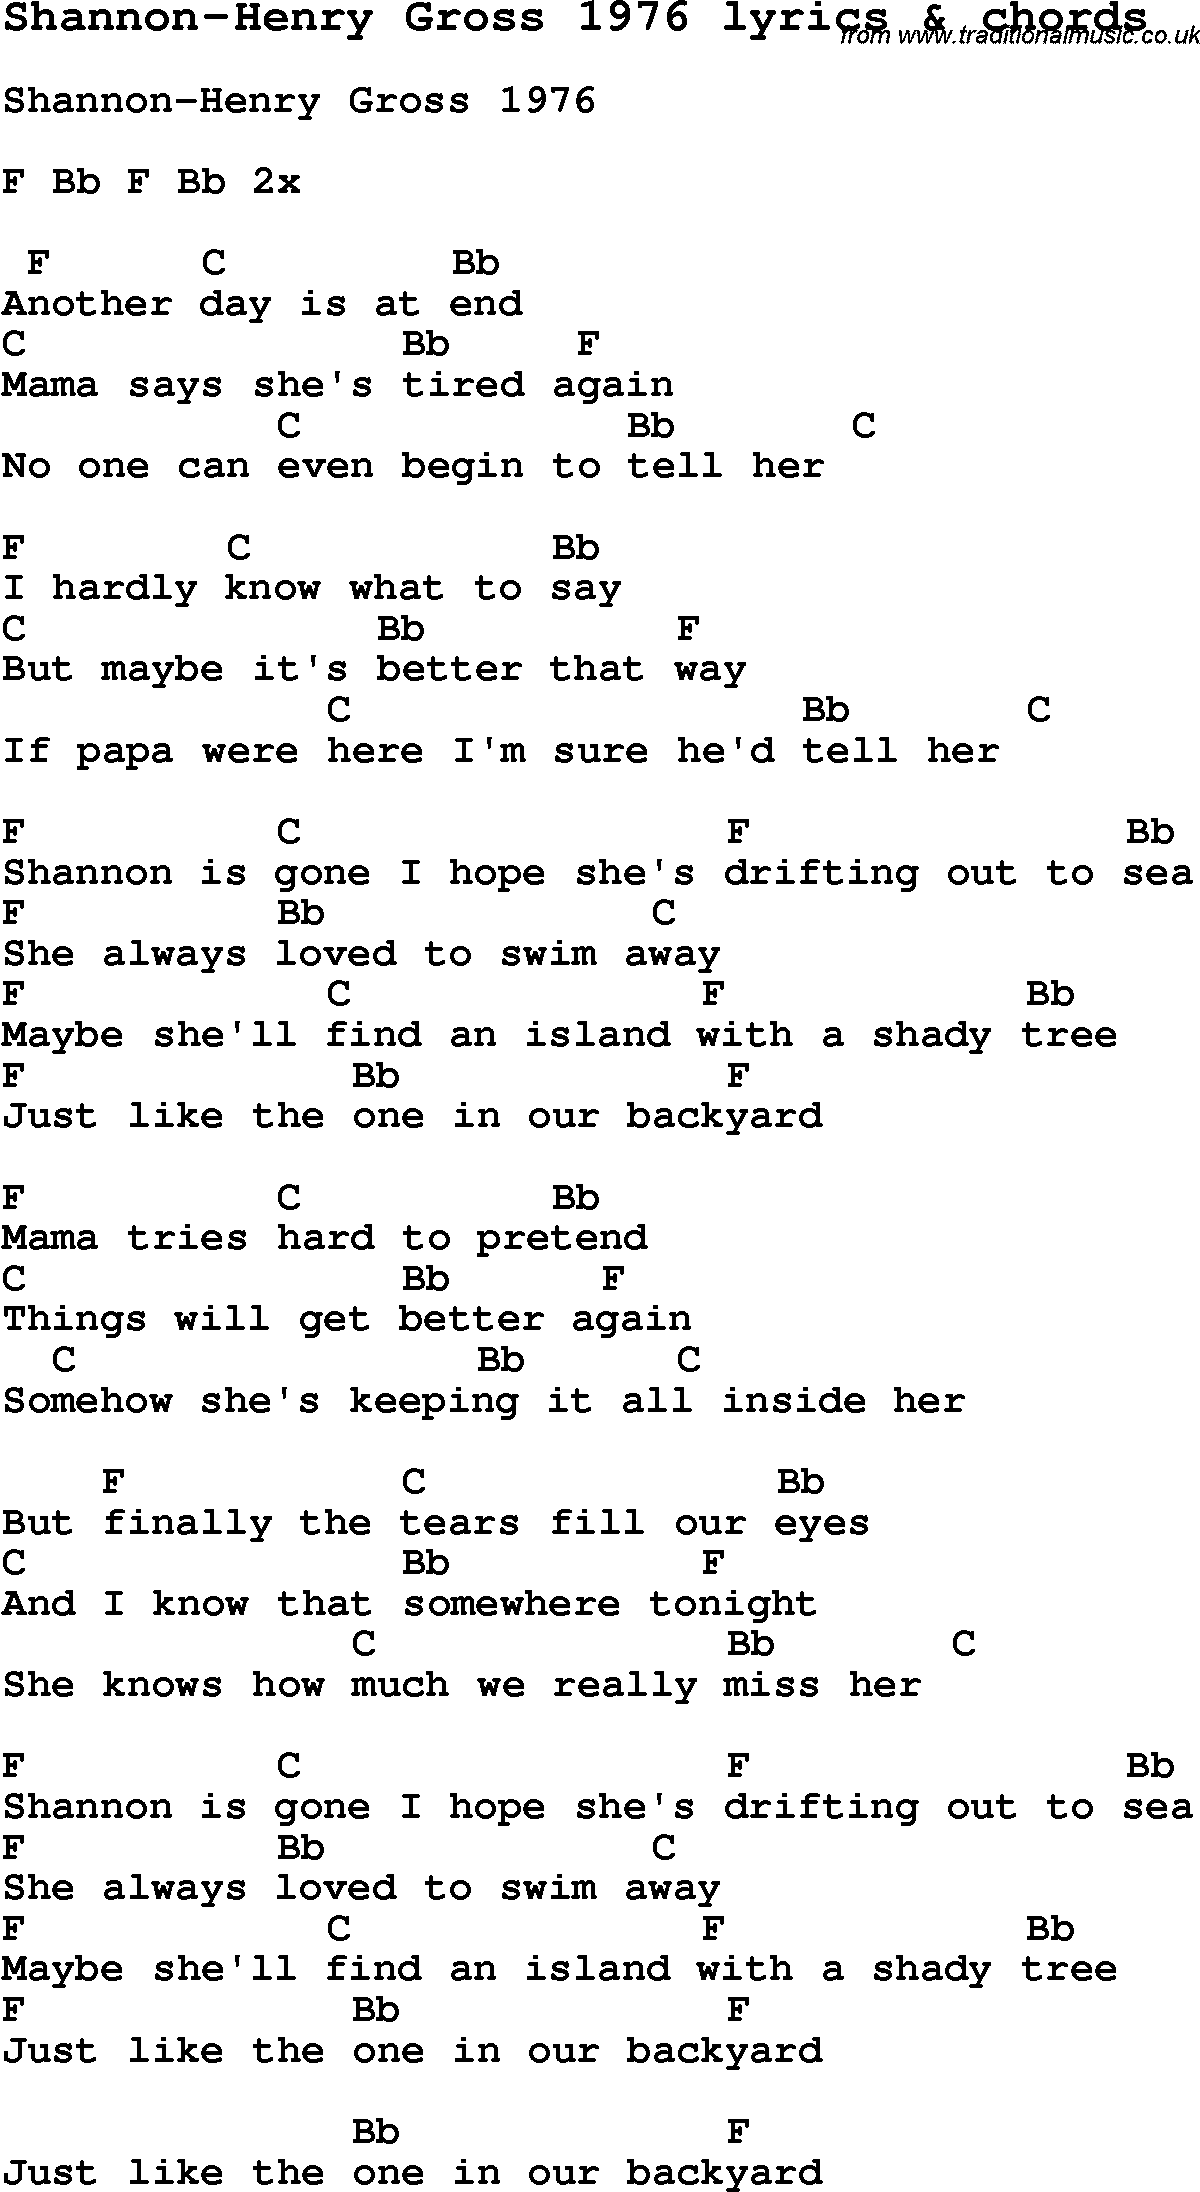 Love Song Lyrics for:Shannon-Henry Gross 1976 with chords.